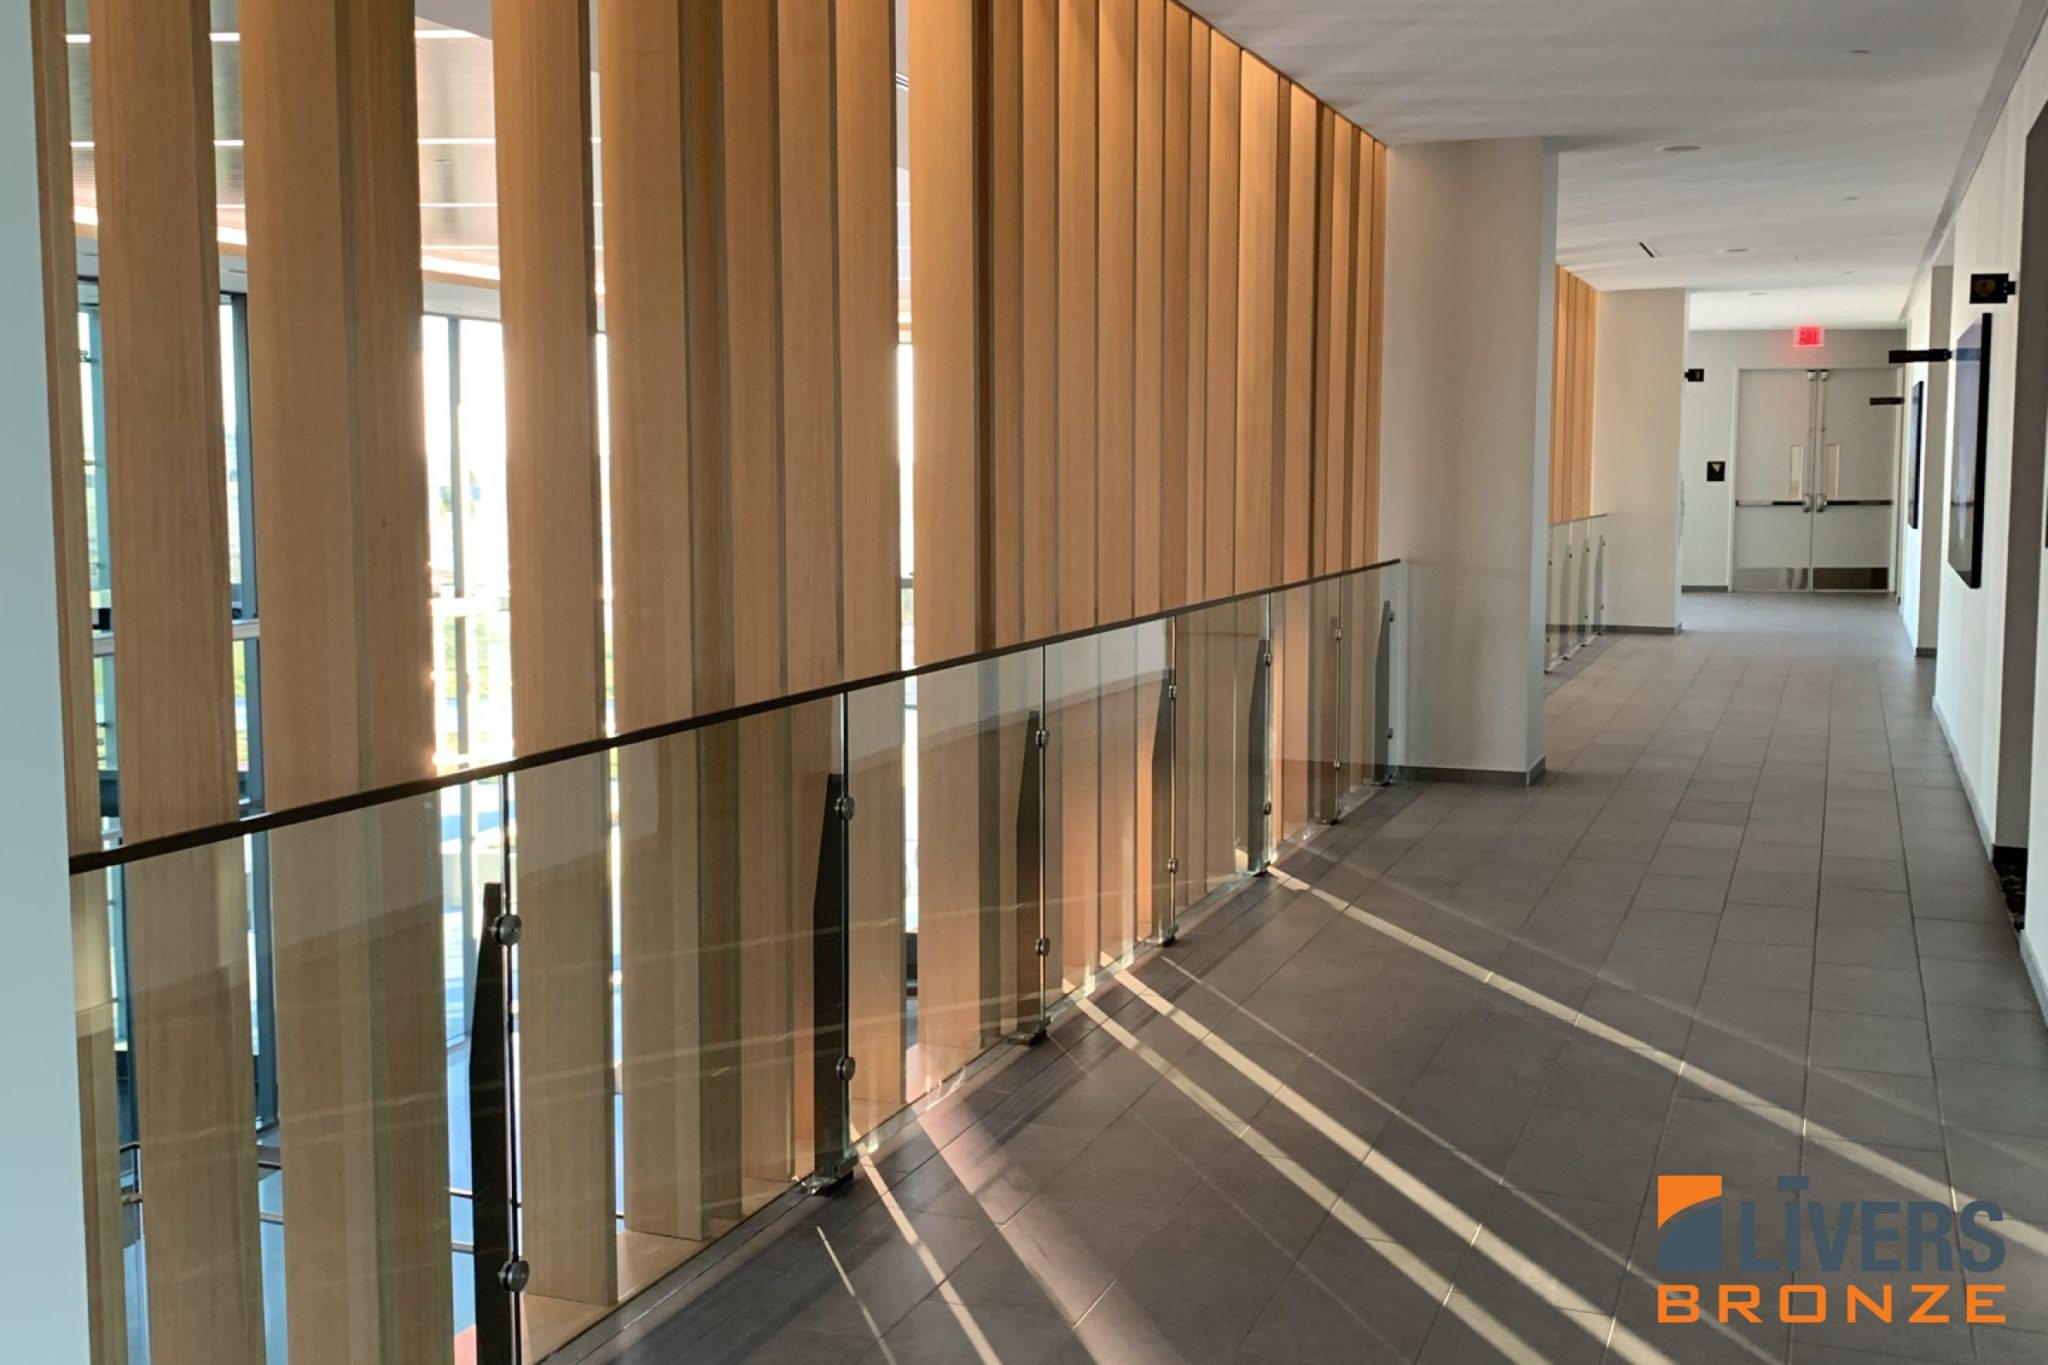 Livers Bronze Belmont Stainless Steel Railings with Powder Coated Railing Posts were installed at the office lobby stairs at Sammons Financial Headquarters, Des Moines, Iowa, and were Made in the USA.